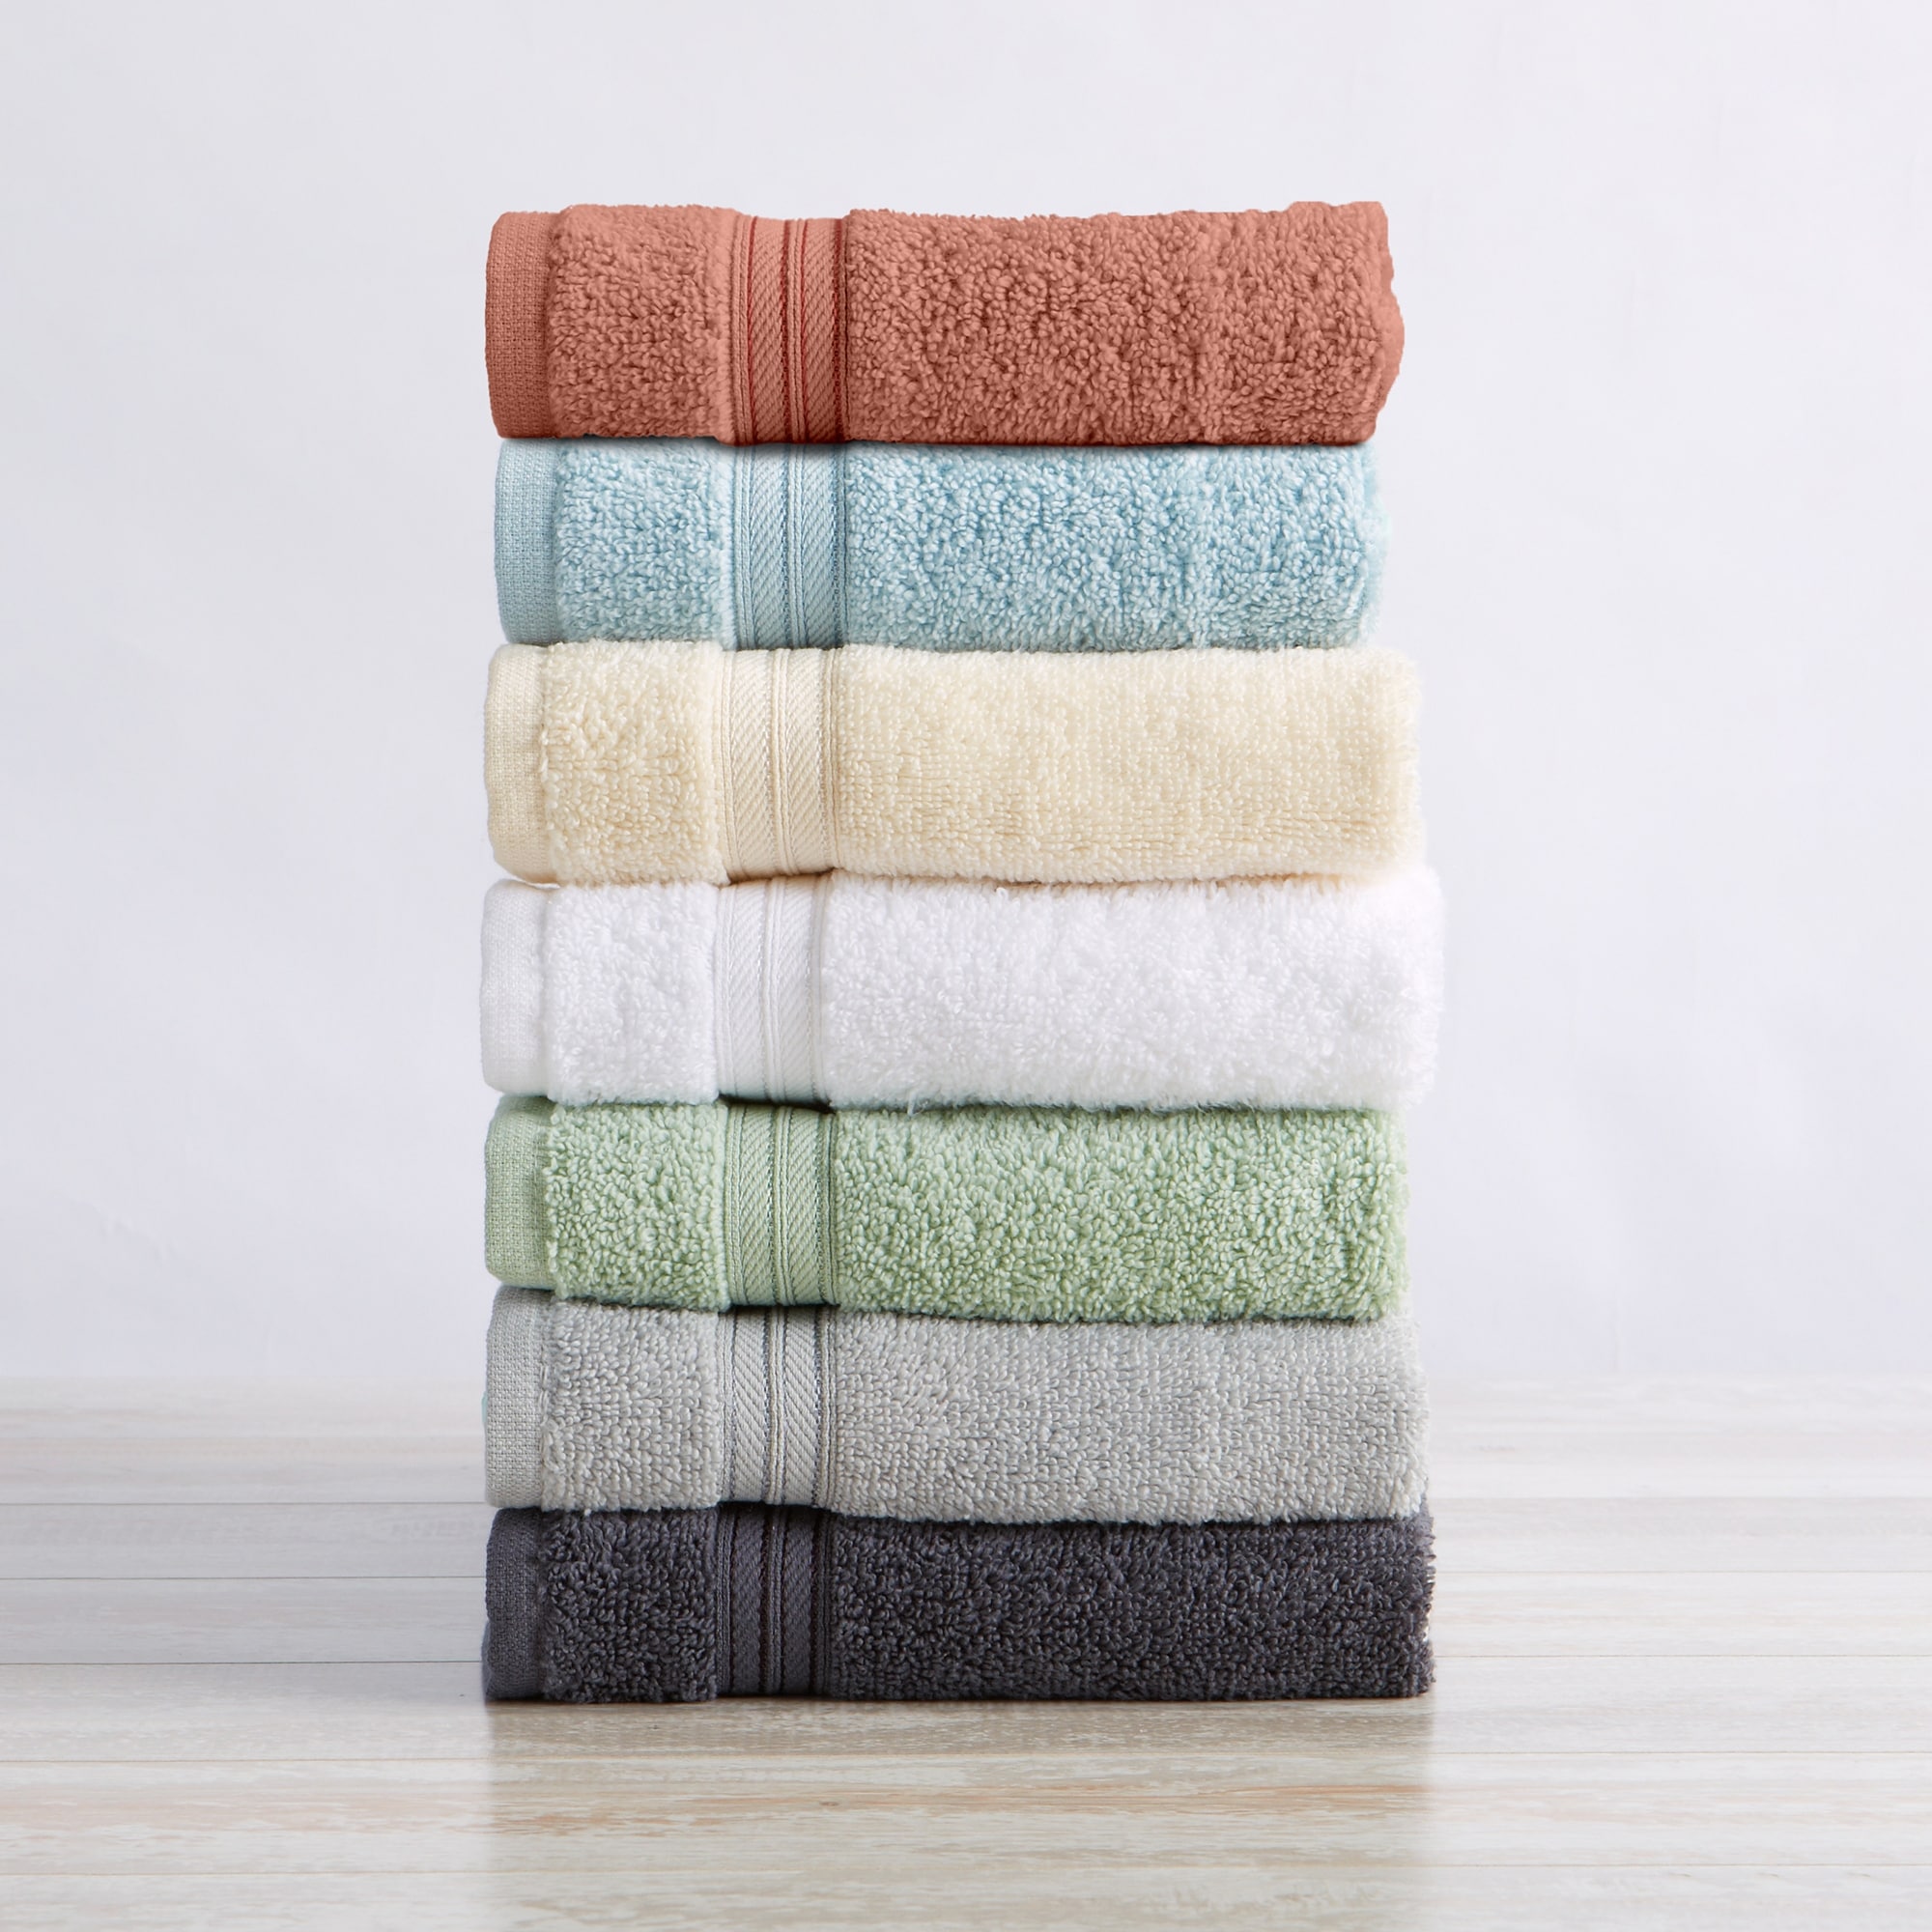 https://ak1.ostkcdn.com/images/products/is/images/direct/c3a4bc03e72ee2455b99bd5e2dfb20dc38b67f60/Great-Bay-Home-Quick-Dry-Cotton-Towel-Set-Cooper-Collection.jpg